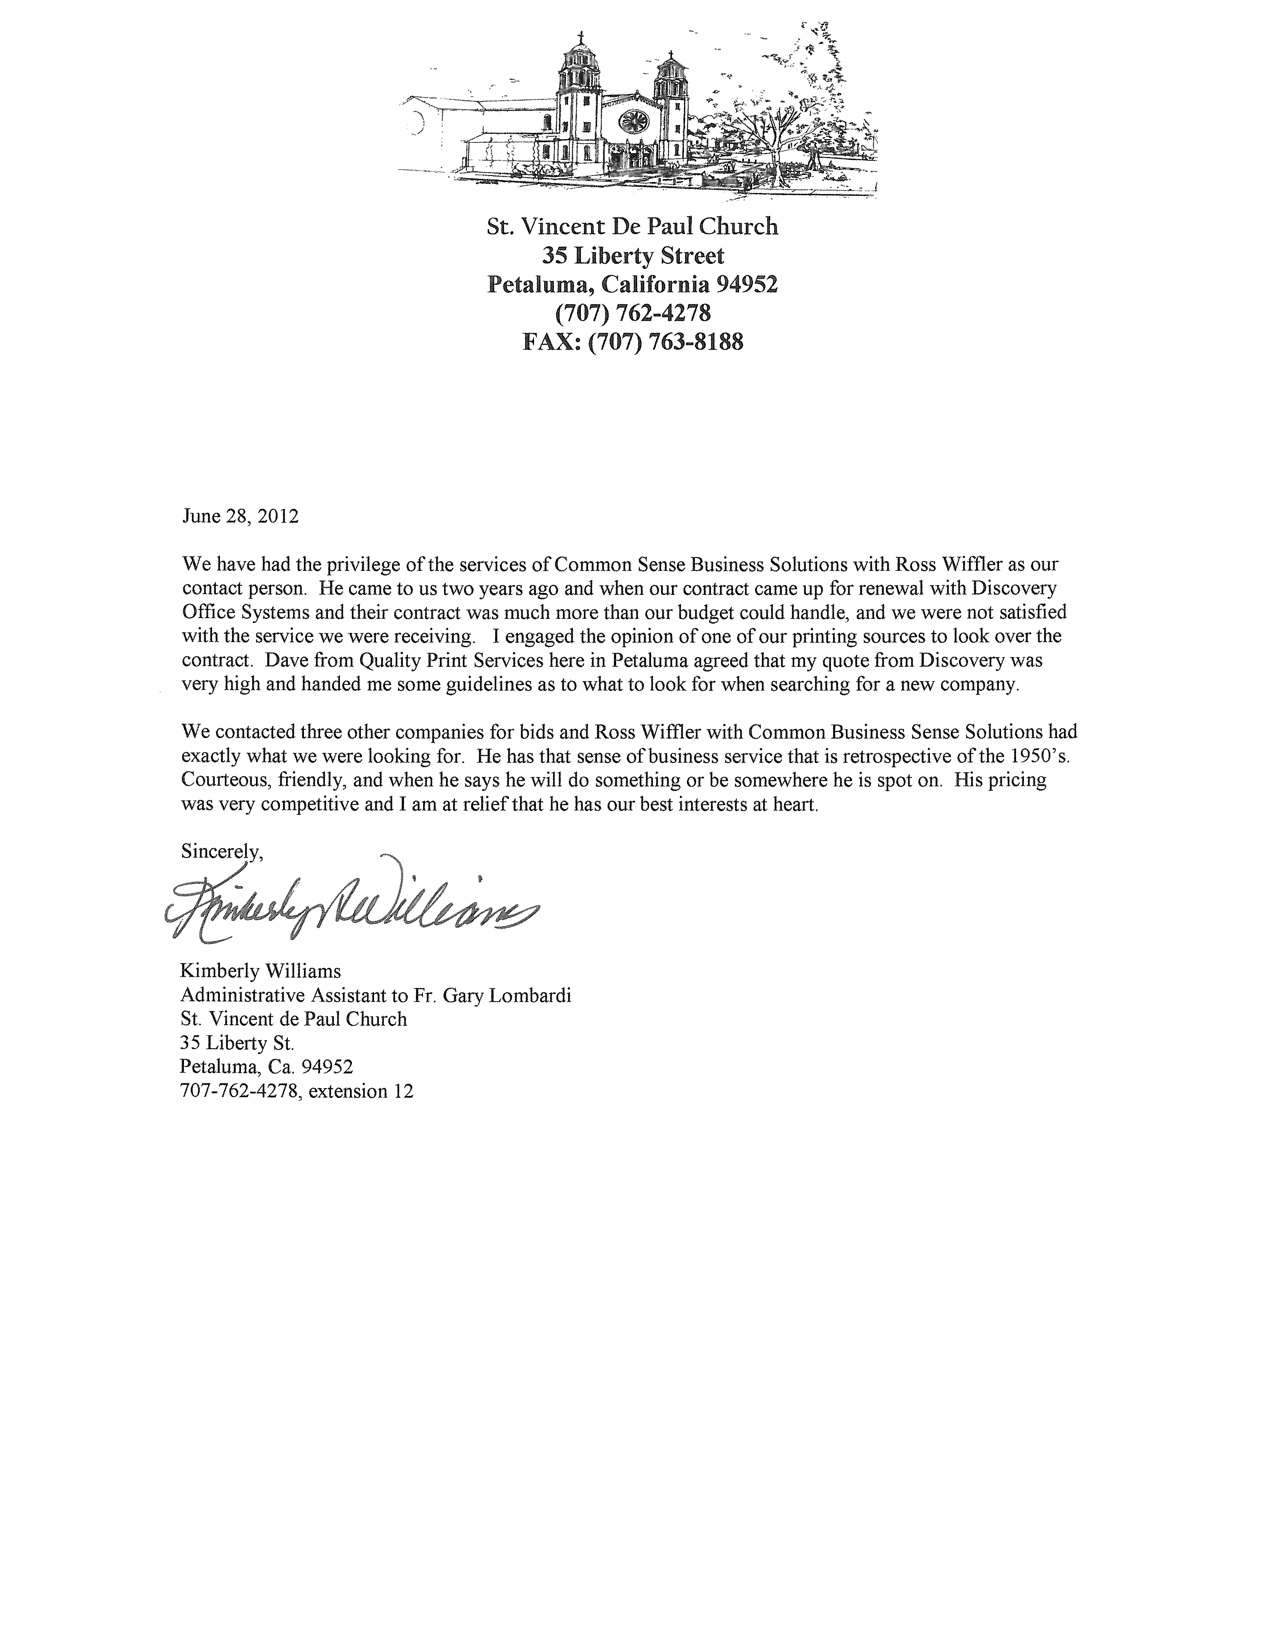 sample-letter-of-recommendation-for-church-member-invitation-template